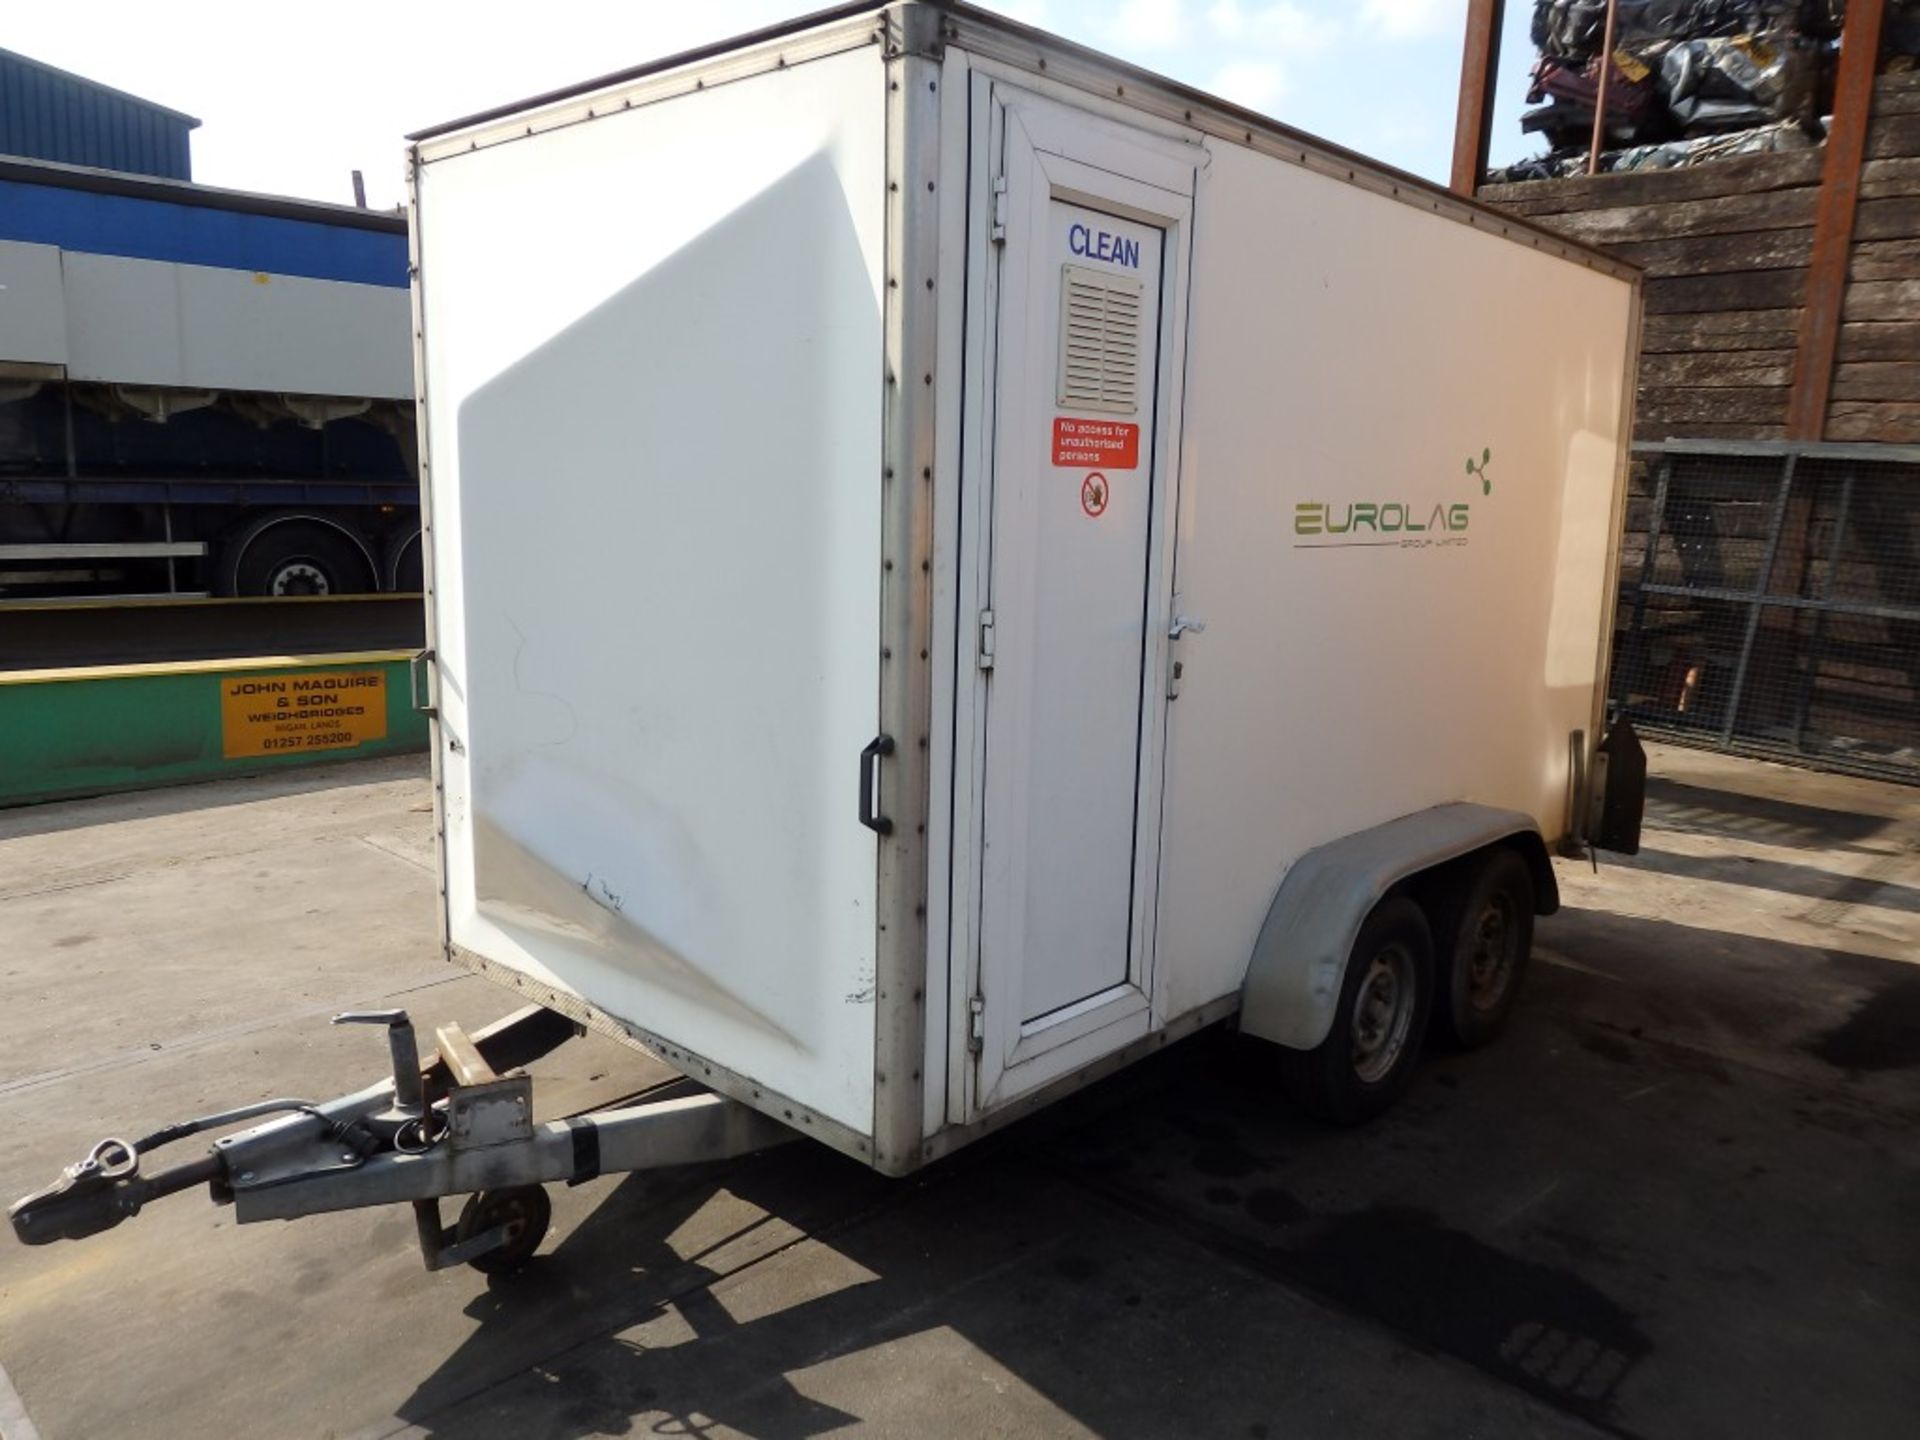 1 x Eurolag Towing Trailer With In and Out Shower Facility - Previously Used As Decontamination Wash - Image 19 of 23